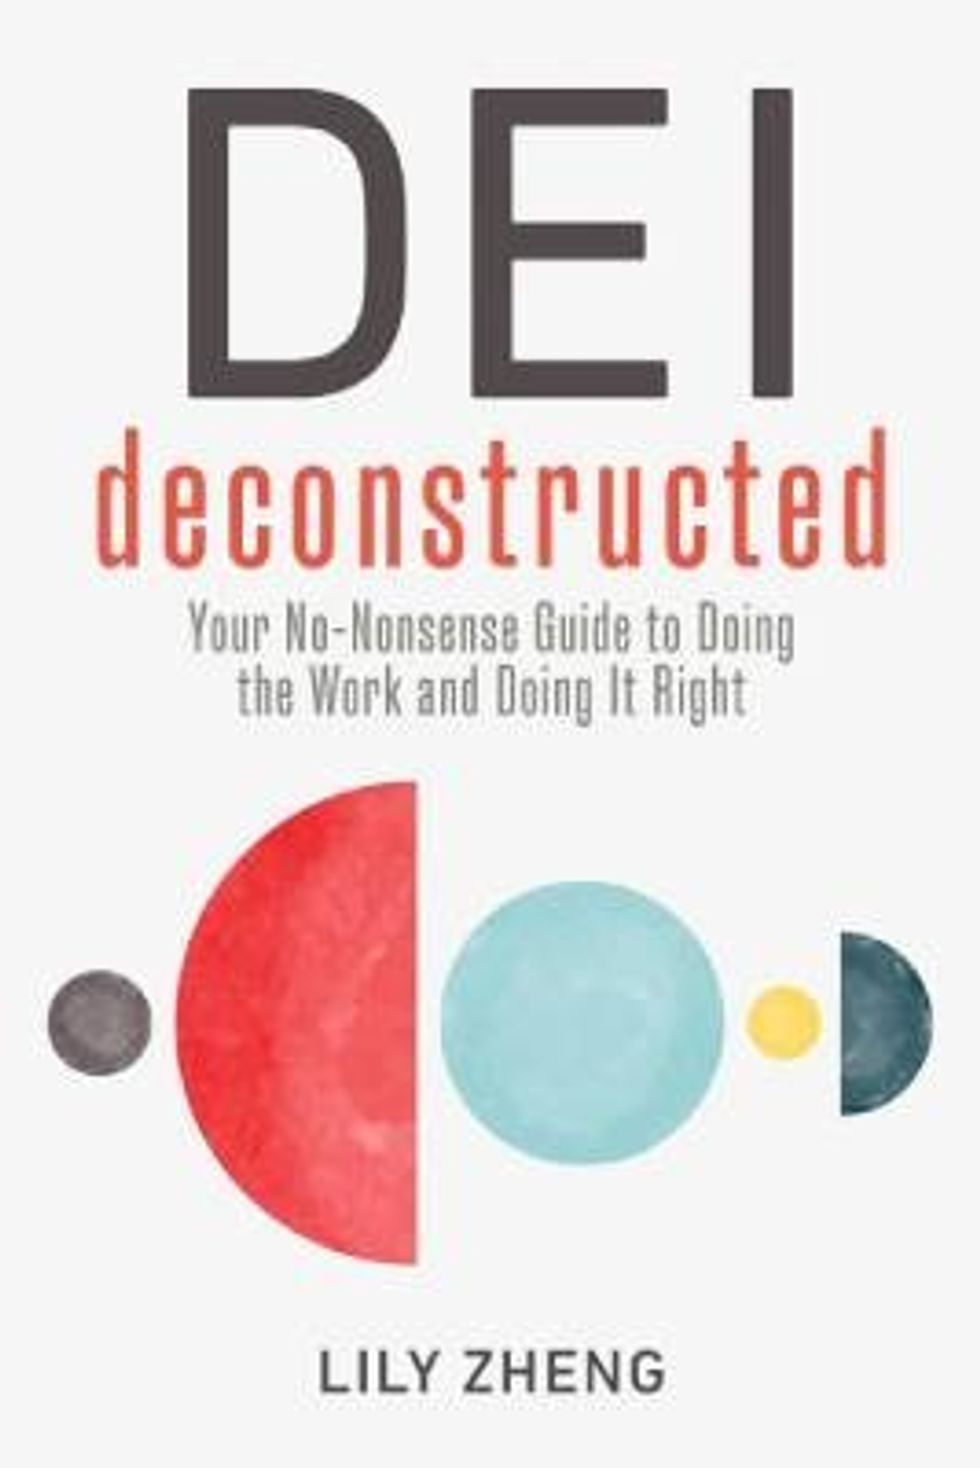 The front cover of the book "DEI Deconstructed: Your No-Nonsense Guide to Doing the Work and Doing It Right" by Lily Zheng